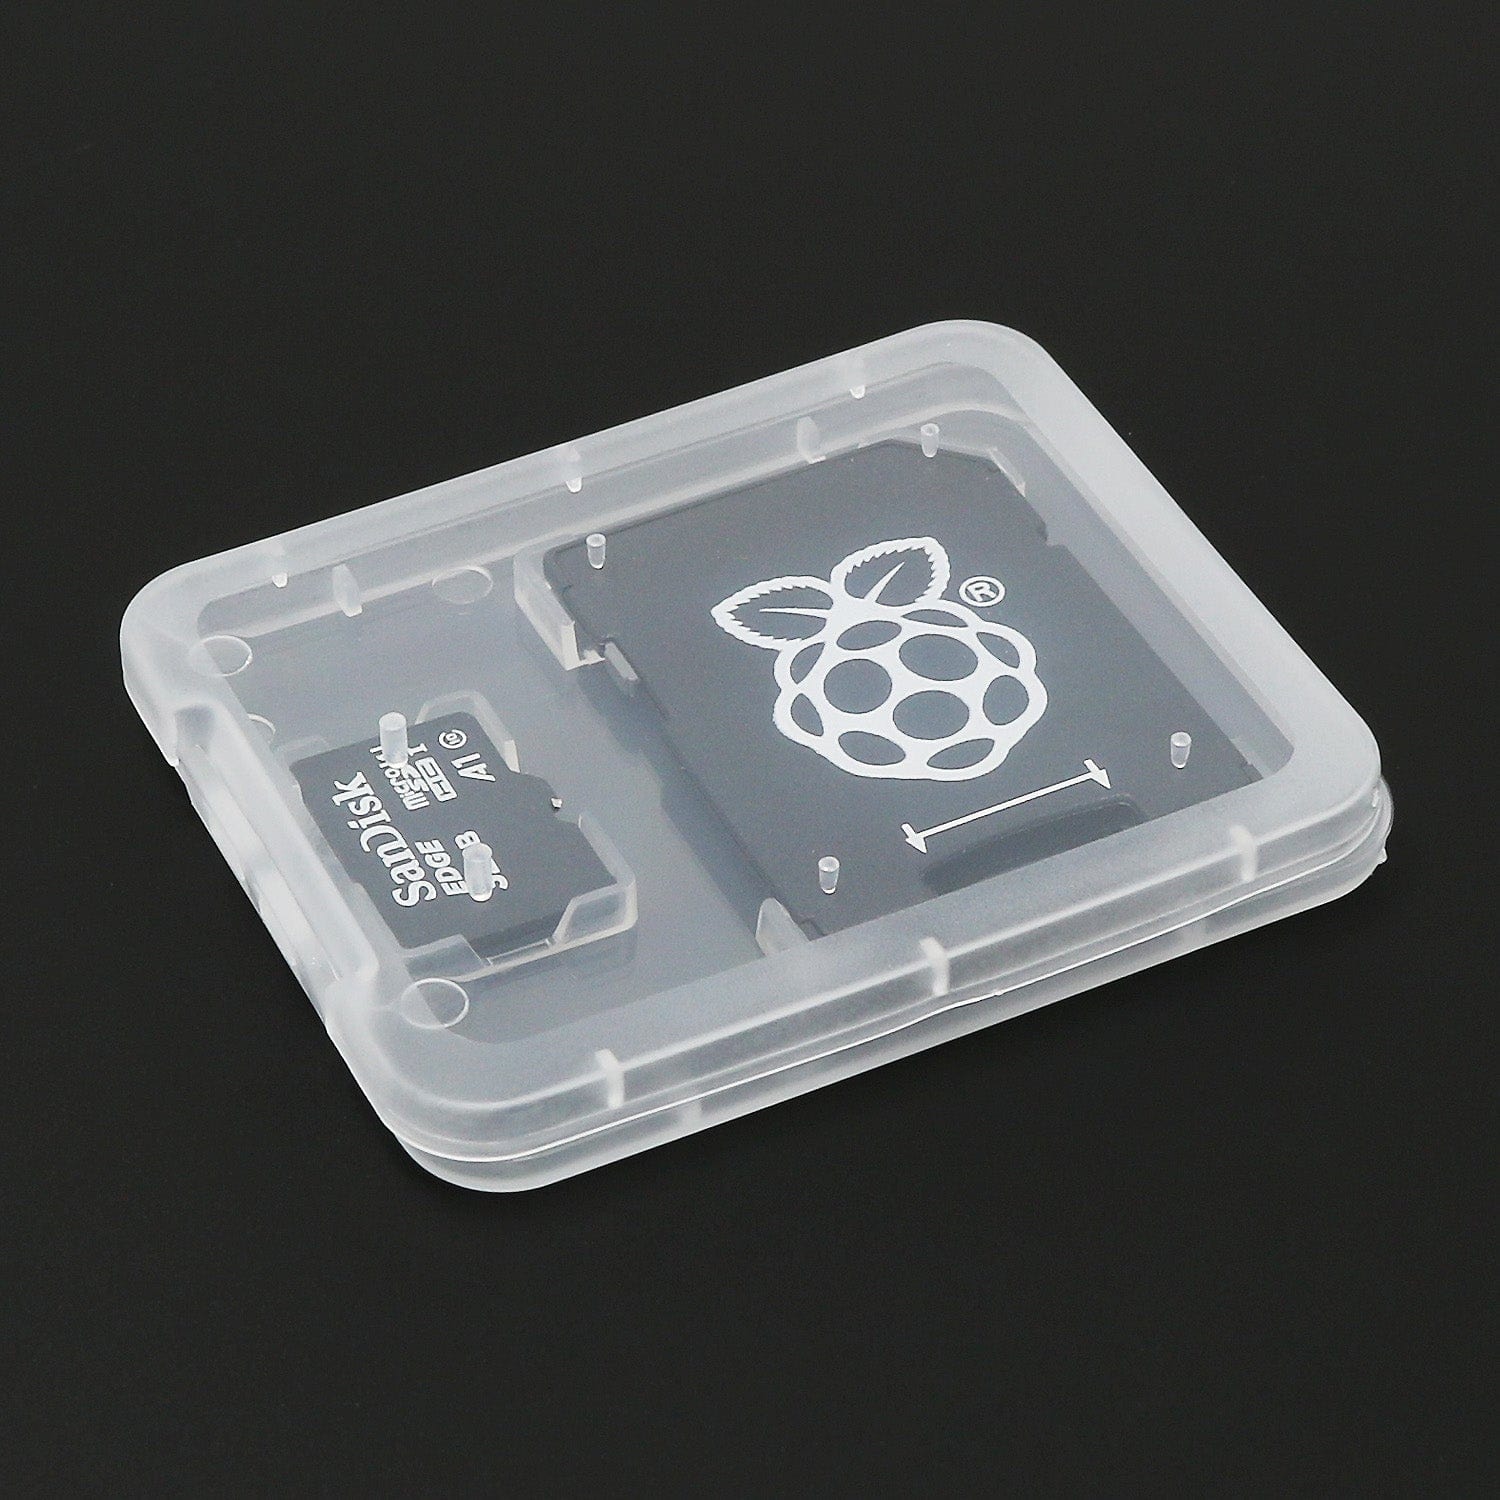 Jewel Cases for MicroSD Cards + SD Adapters (4-pack) - The Pi Hut